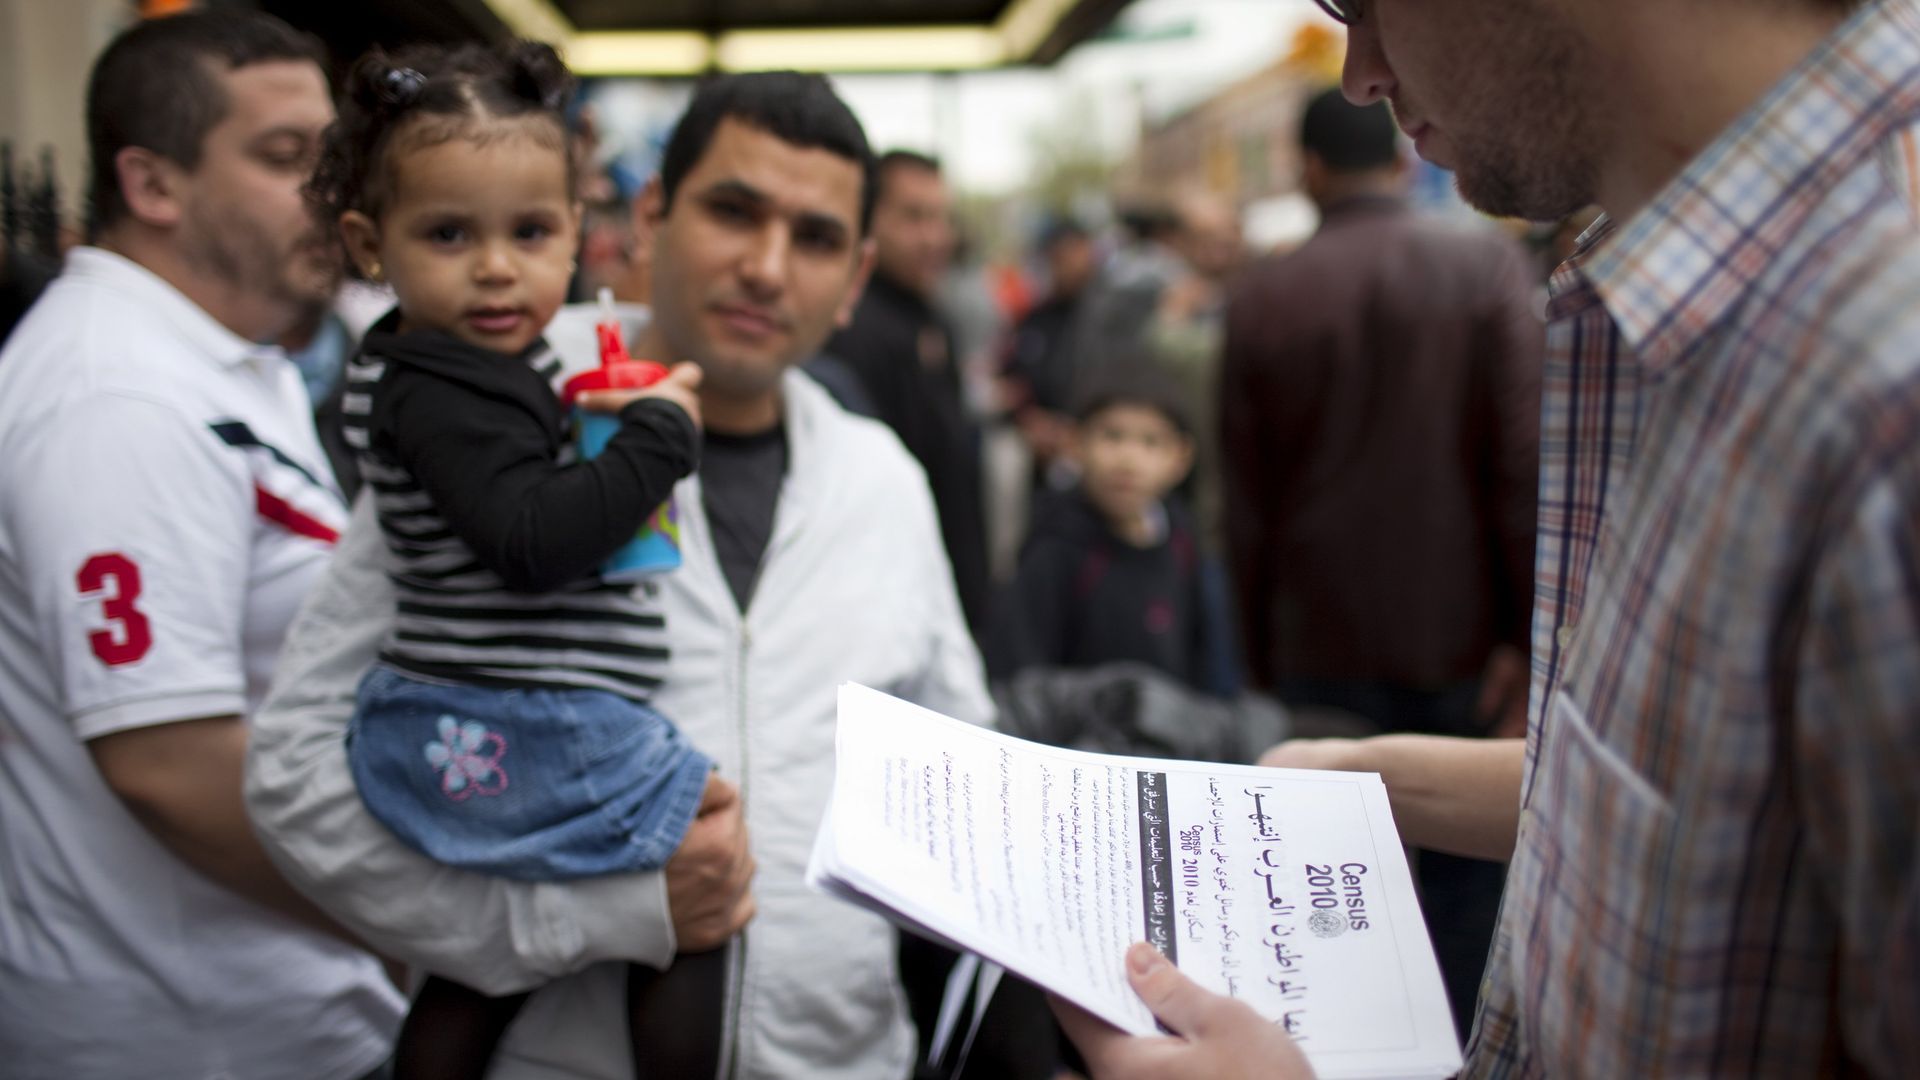 In this image, a man holds a toddler while another man hands out census papers. 